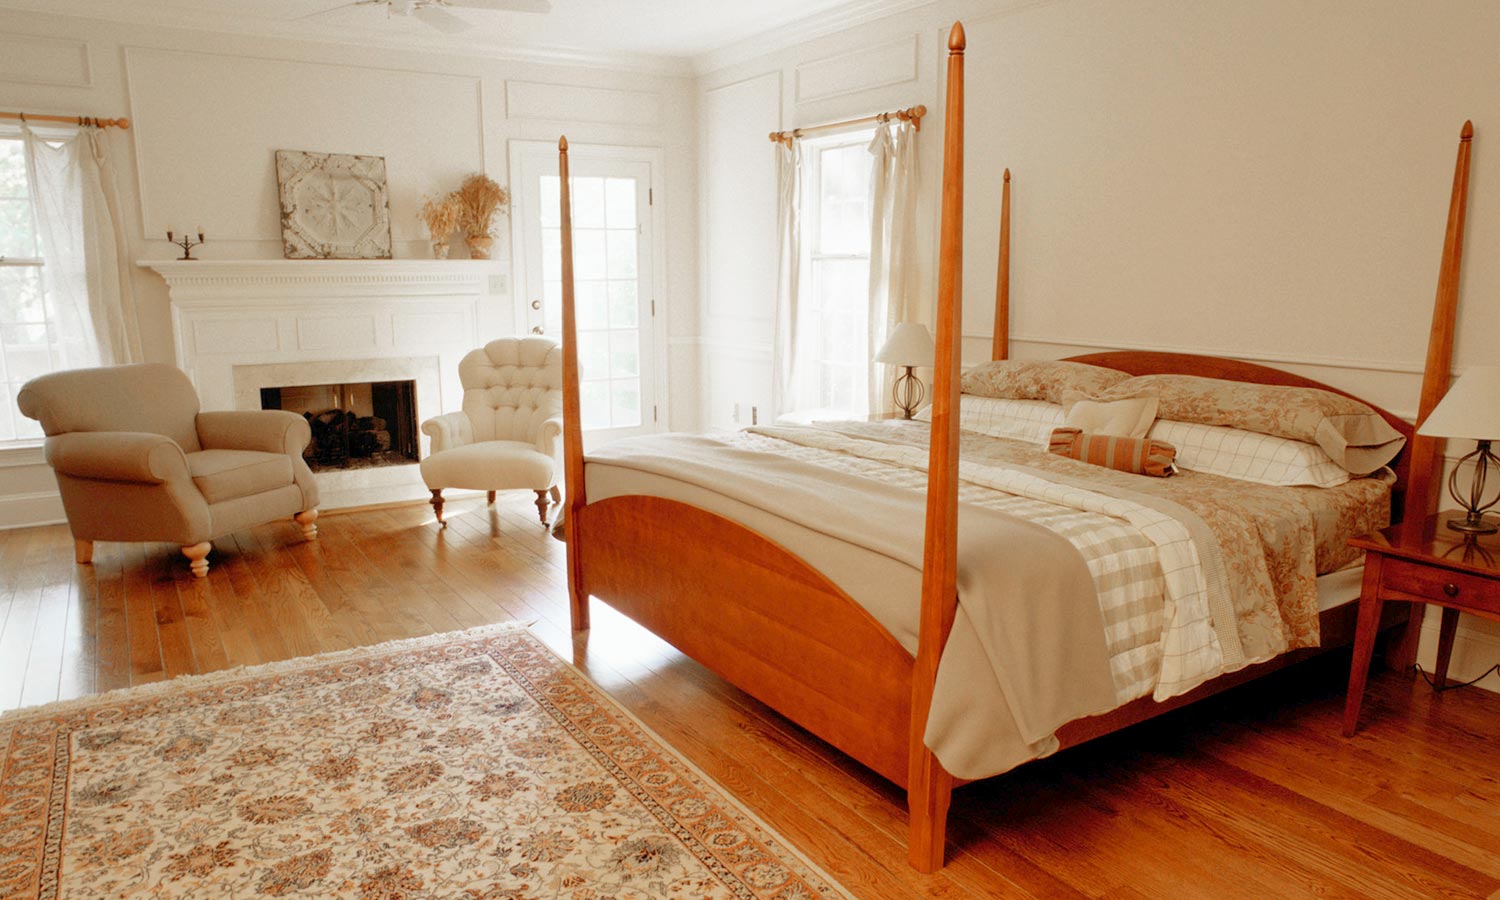 1A four-poster bed with skinny posts on each corner.